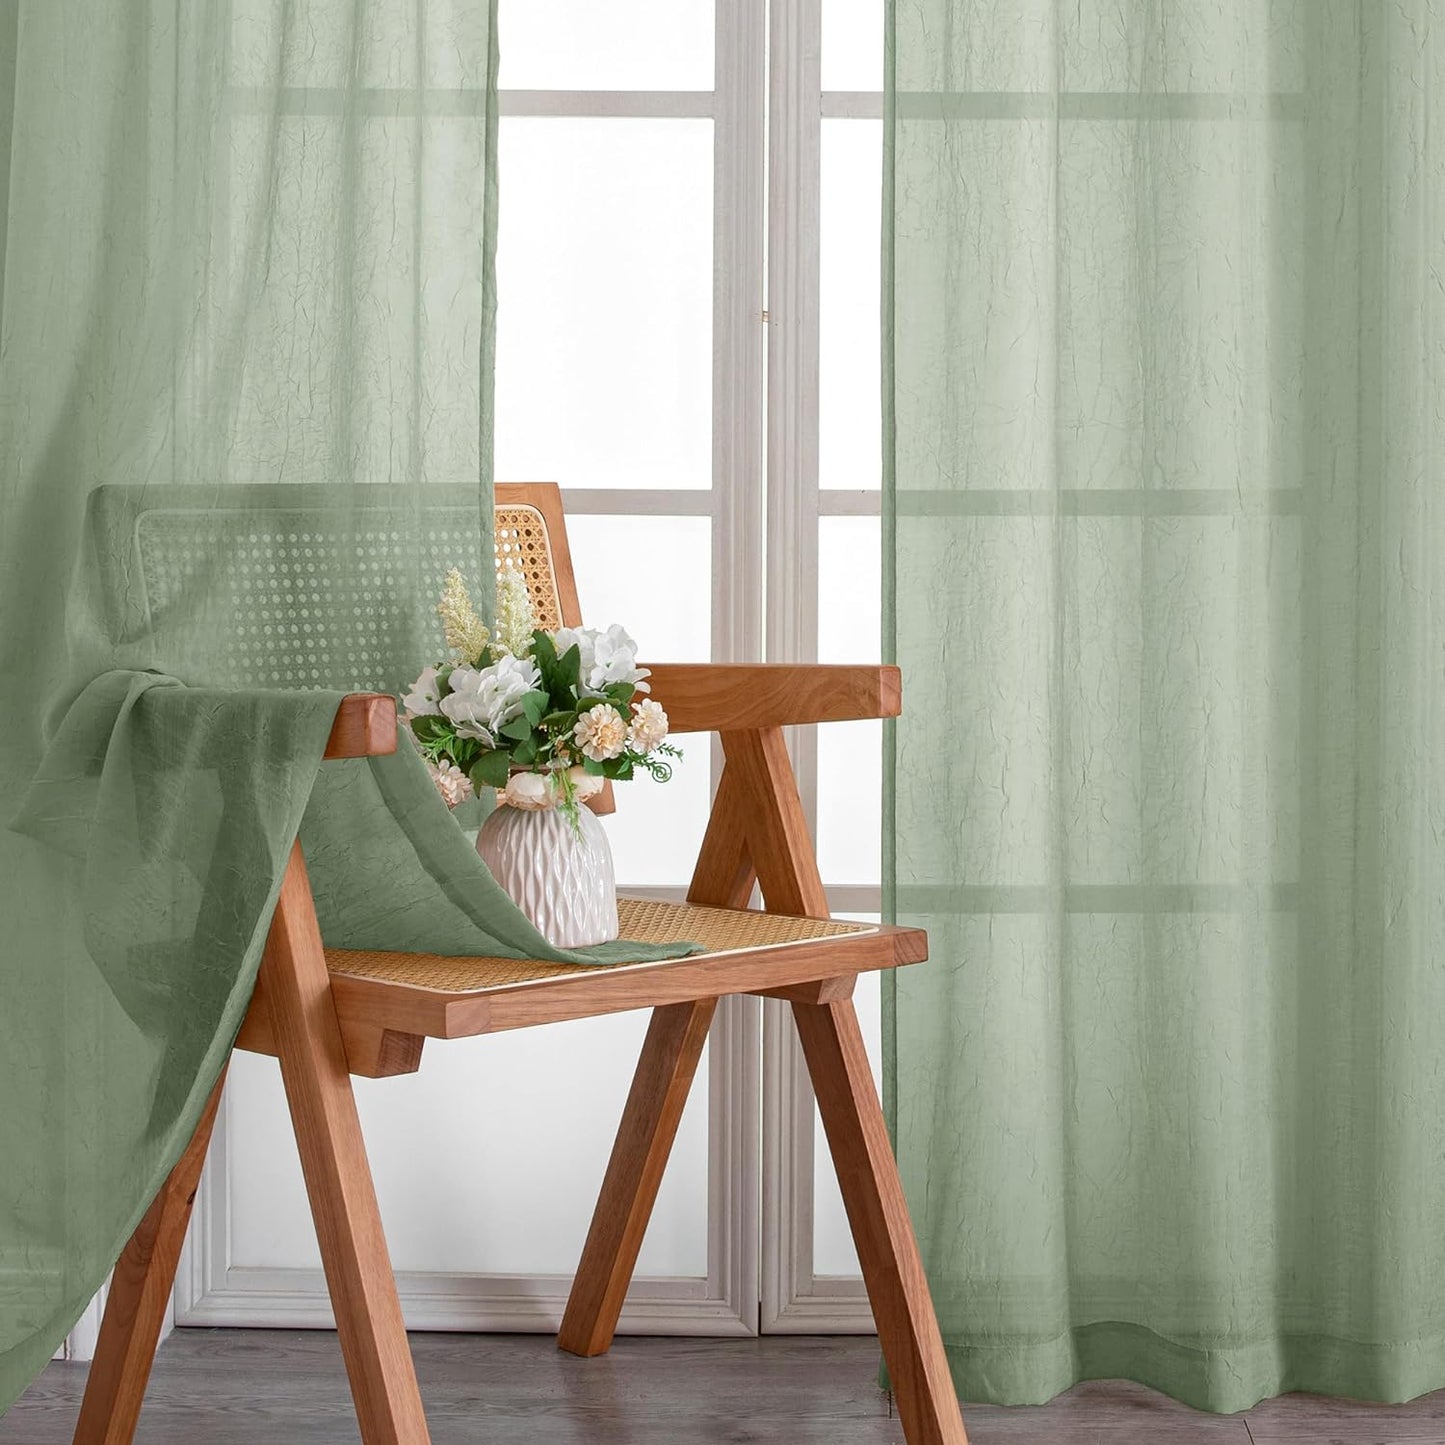 Crushed Sheer White Curtains 63 Inch Length 2 Panels, Light Filtering Solid Crinkle Voile Short Sheer Curtian for Bedroom Living Room, Each 42Wx63L Inches  Chyhomenyc Sage Green 42 W X 72 L 